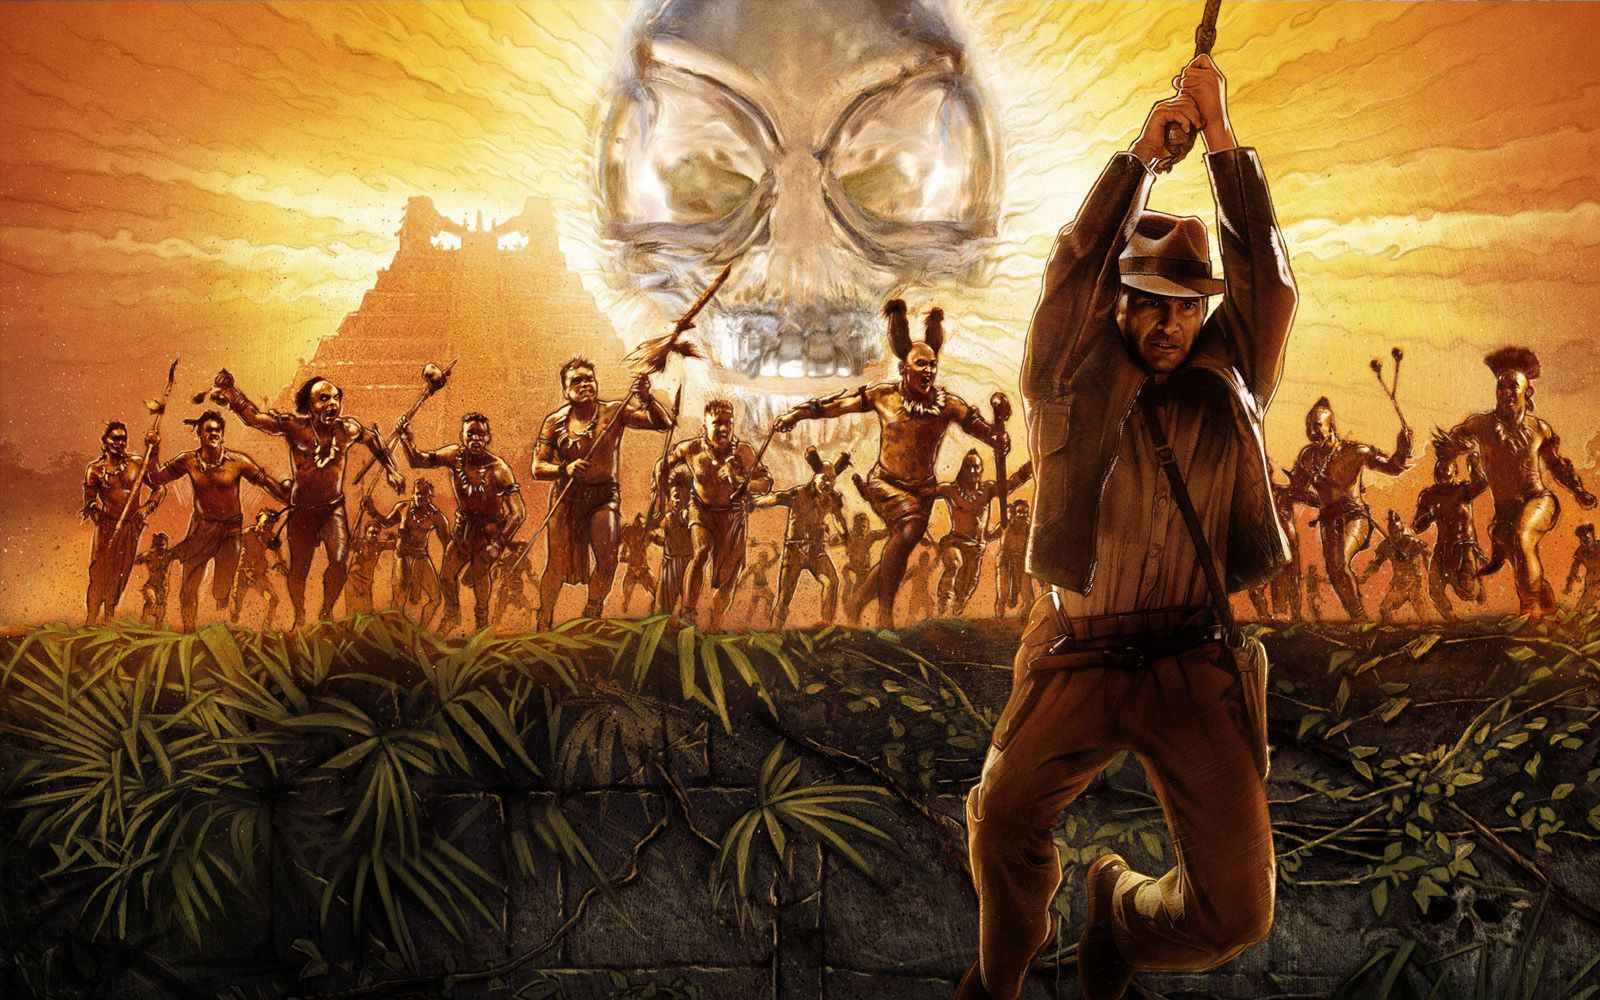 Indiana Jones and the Kingdom of the Crystal Skull by Steven Spielberg